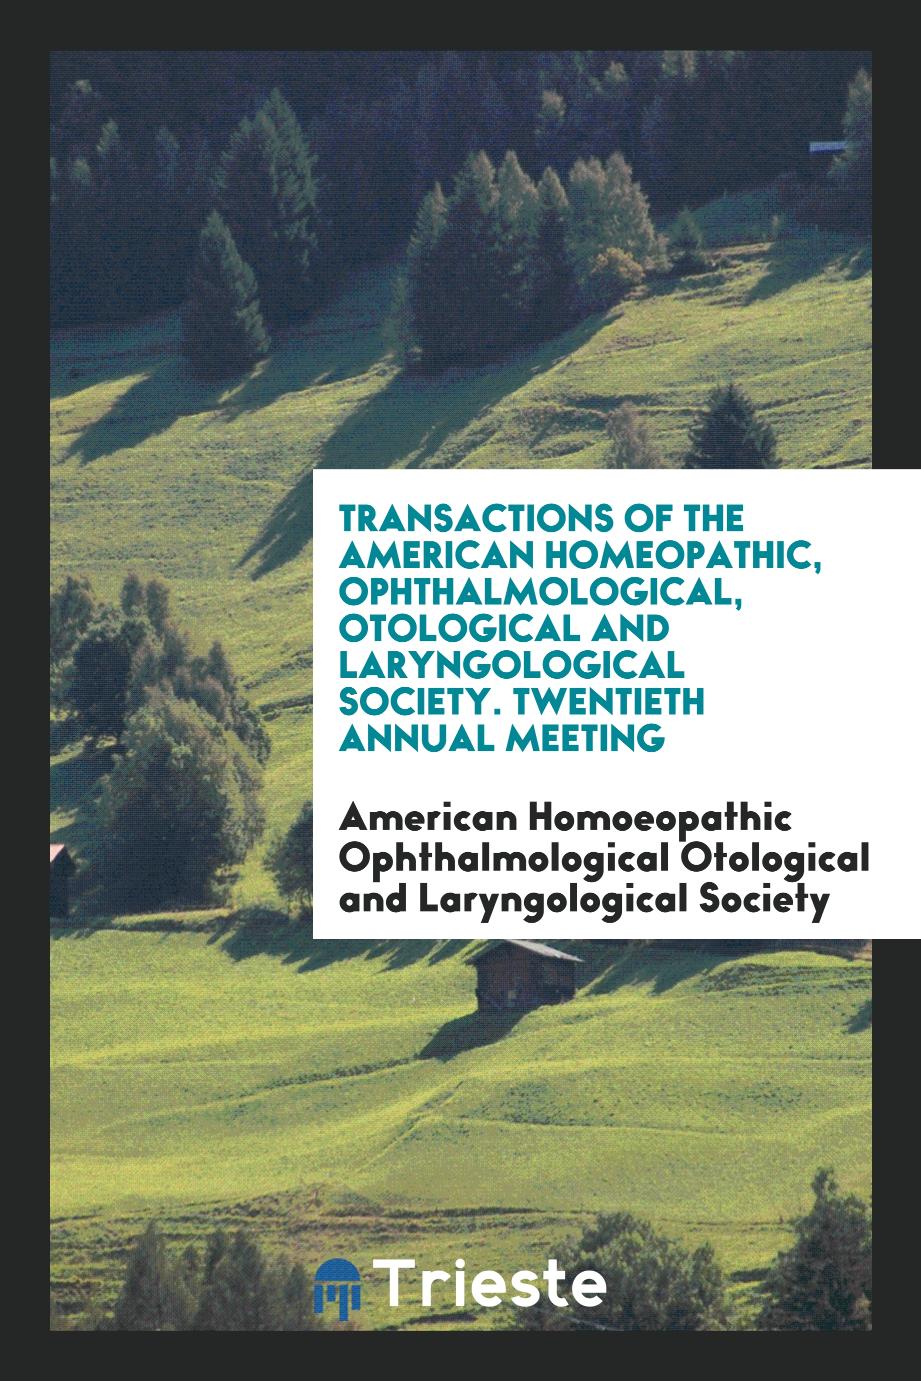 Transactions of the American Homeopathic, Ophthalmological, Otological and Laryngological Society. Twentieth Annual Meeting